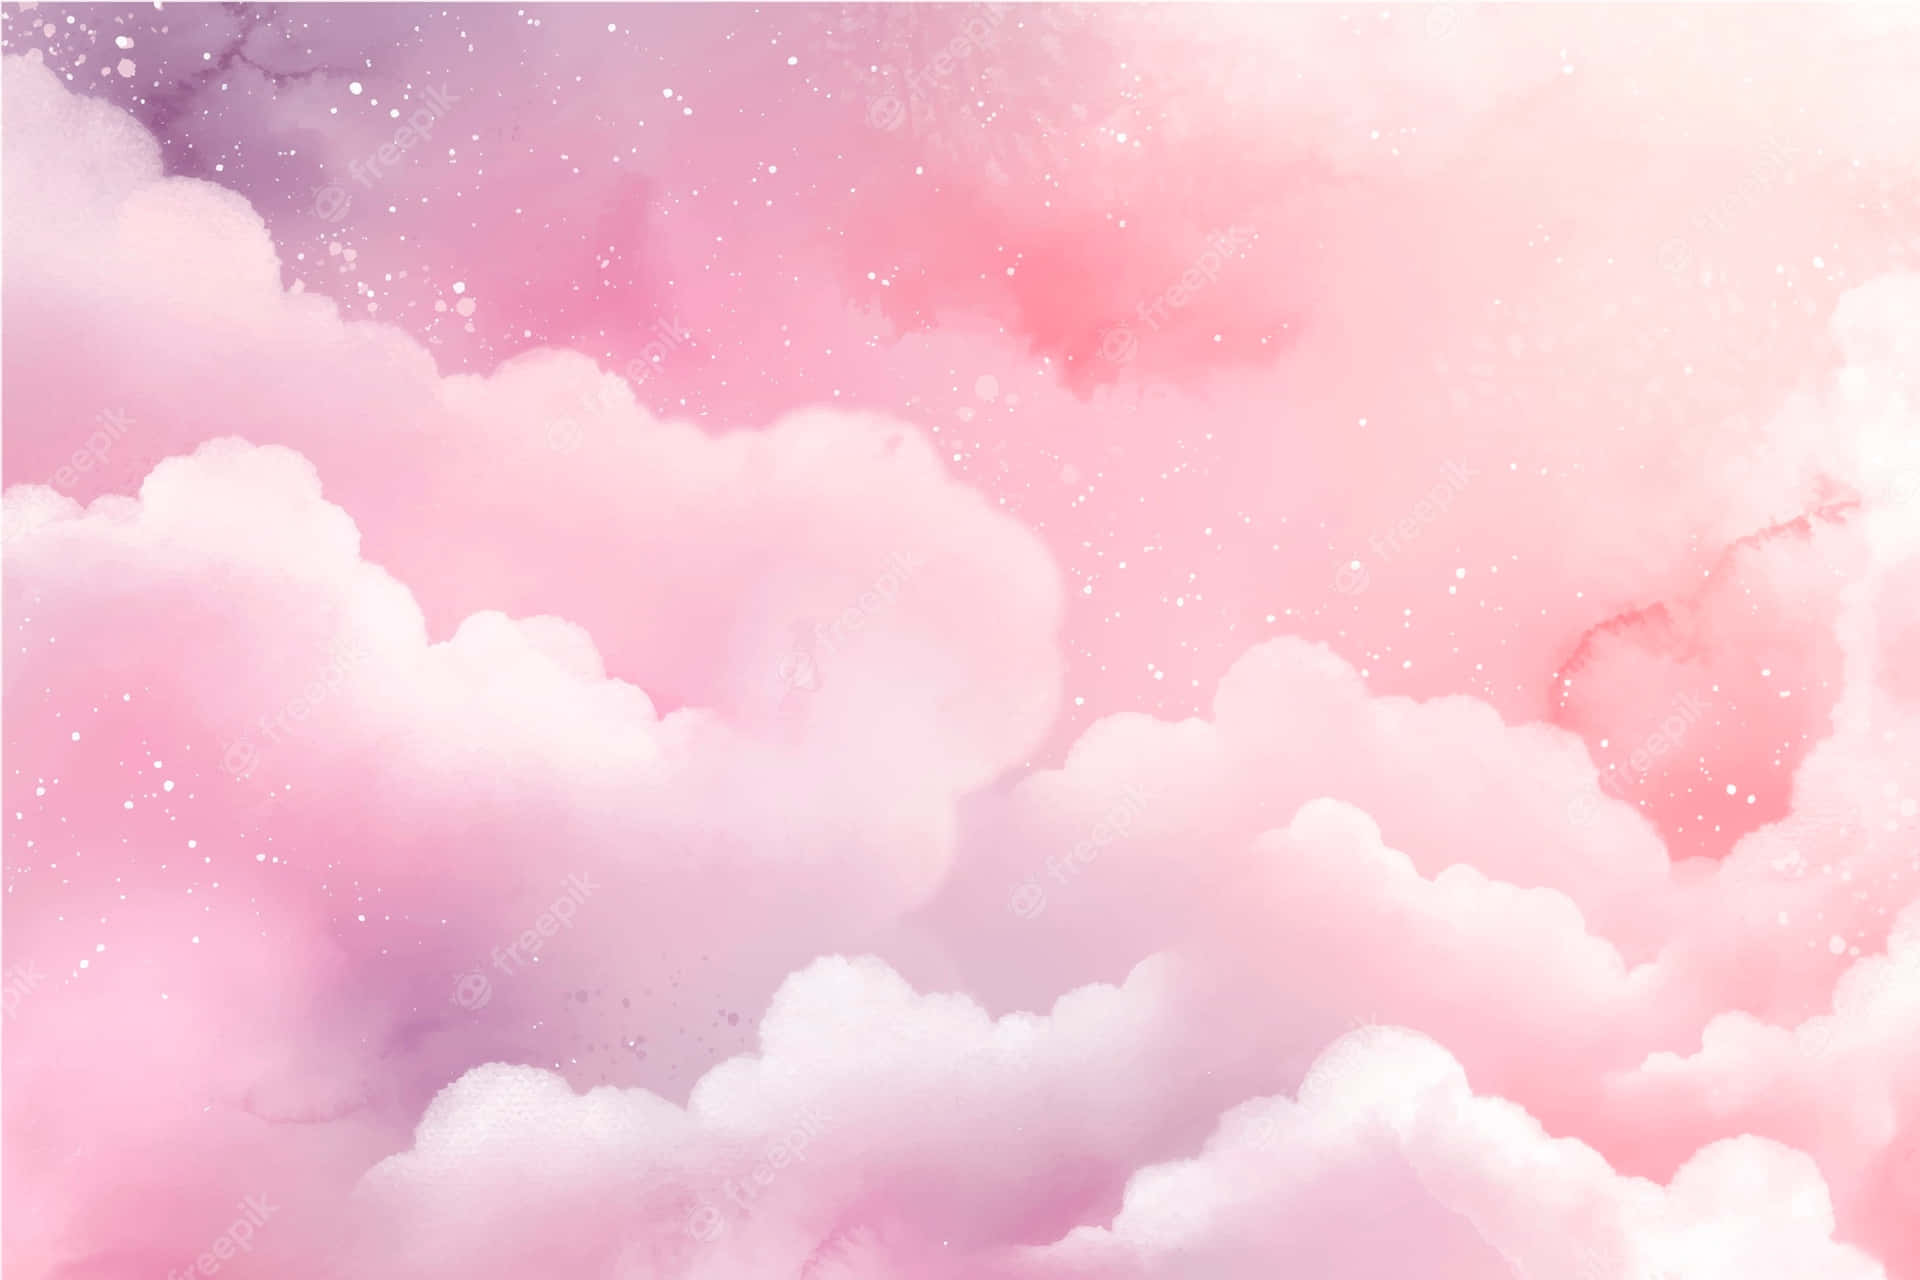 Celestial oasis - A verdant landscape surrounded by dreamy pink clouds.